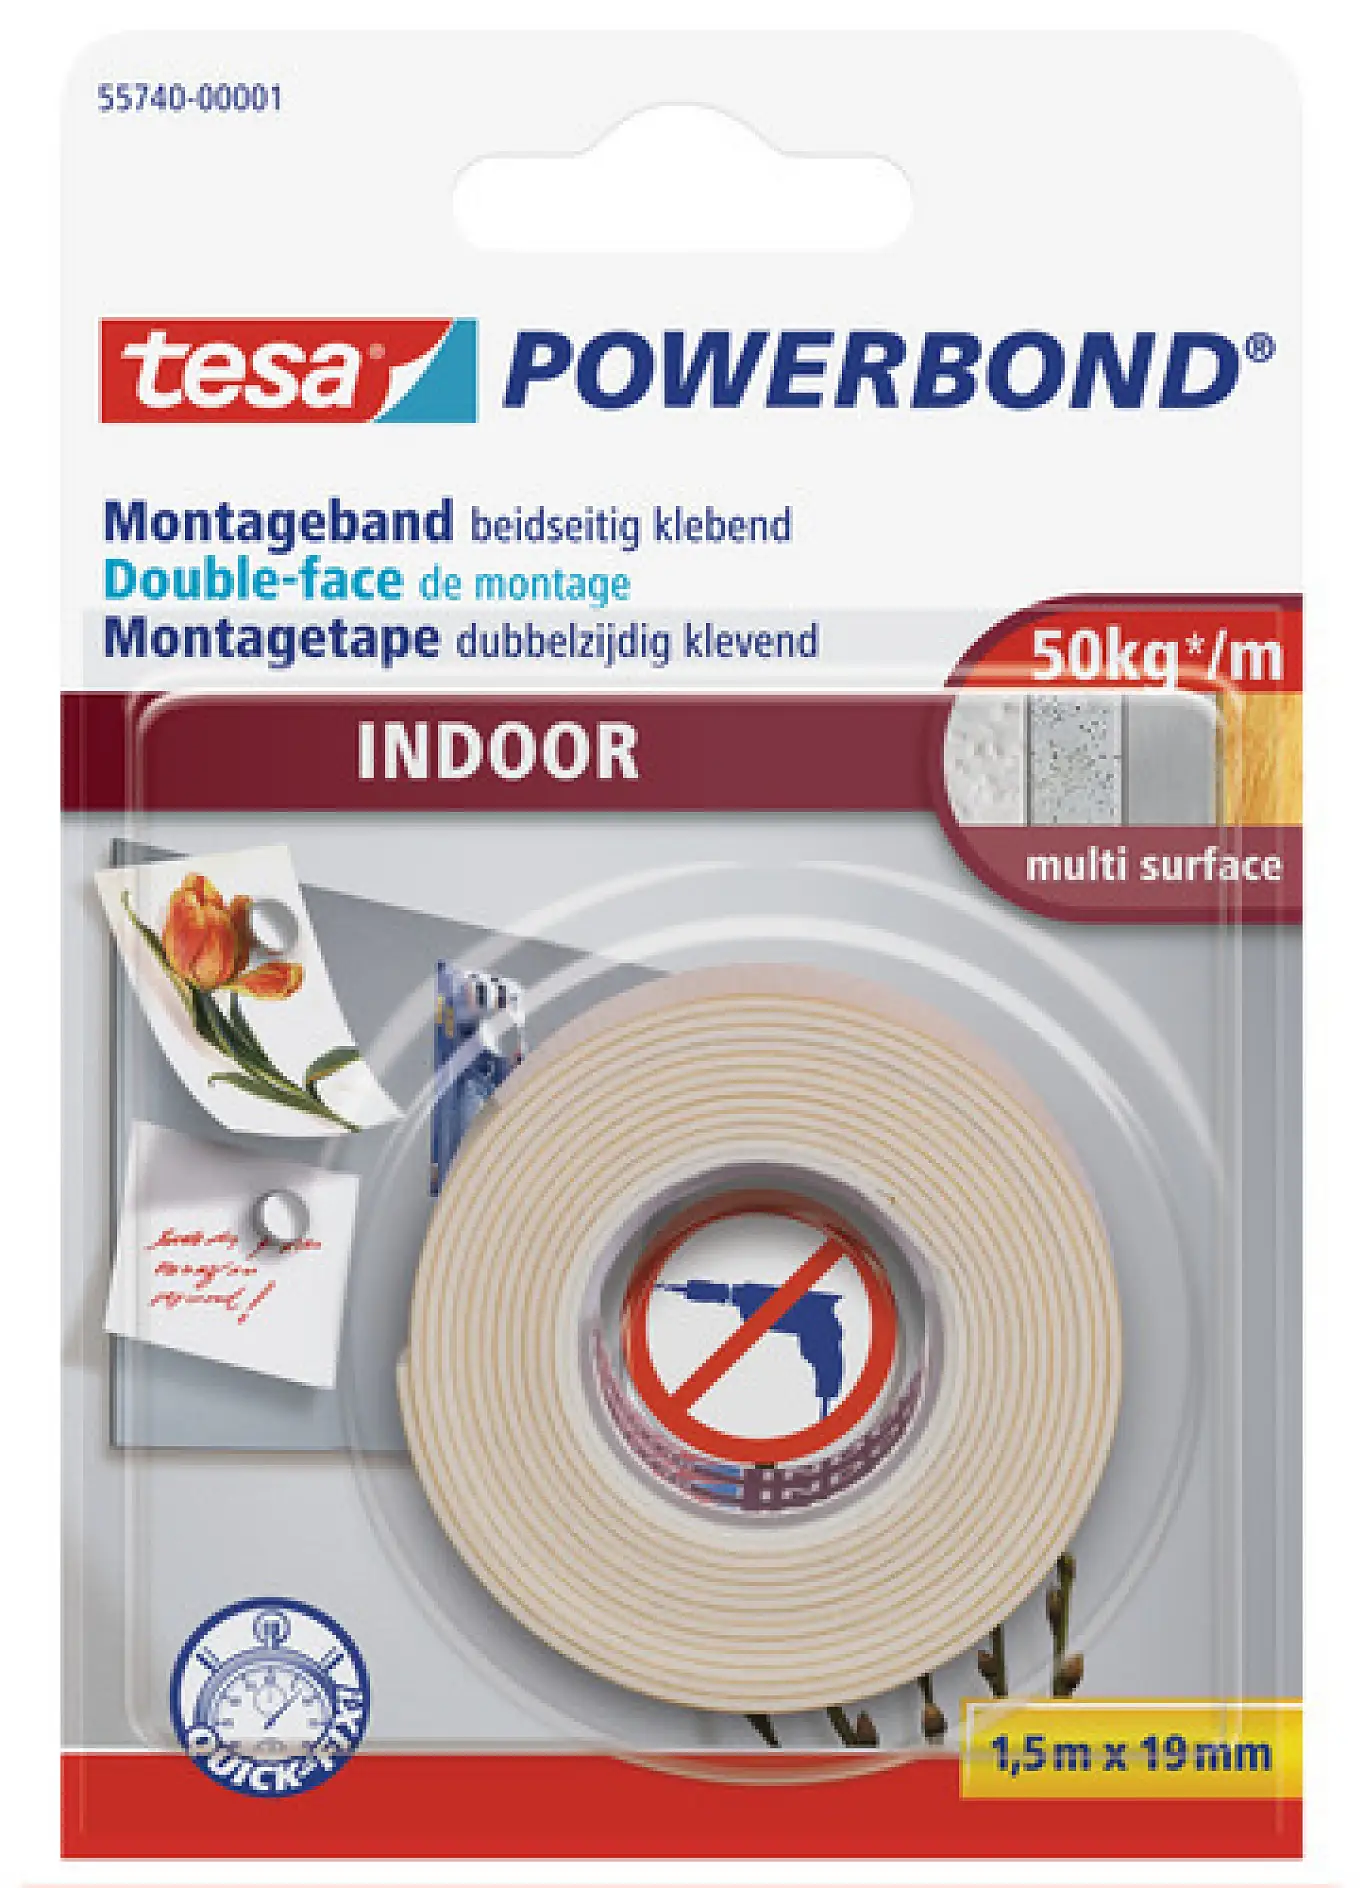 tesa® Powerbond INDOOR is a versatile double-sided self-adhesive mounting tape which can be used for a wide range of household jobs. It is the perfect alternative to drilling as underlying surfaces aren't damaged and the fixing tape can be removed if you change your mind.
tesa® Powerbond INDOOR securely fixes flat objects, with a thickness of up to 10 mm, to firm surfaces. In good bonding conditions, a strip of 10 cm of this heavy-duty fixing tape is enough to hold a weight of up to 5 kg. You can use it on any sufficiently firm, flat surface including tiles, wooden panels and most plastics.
